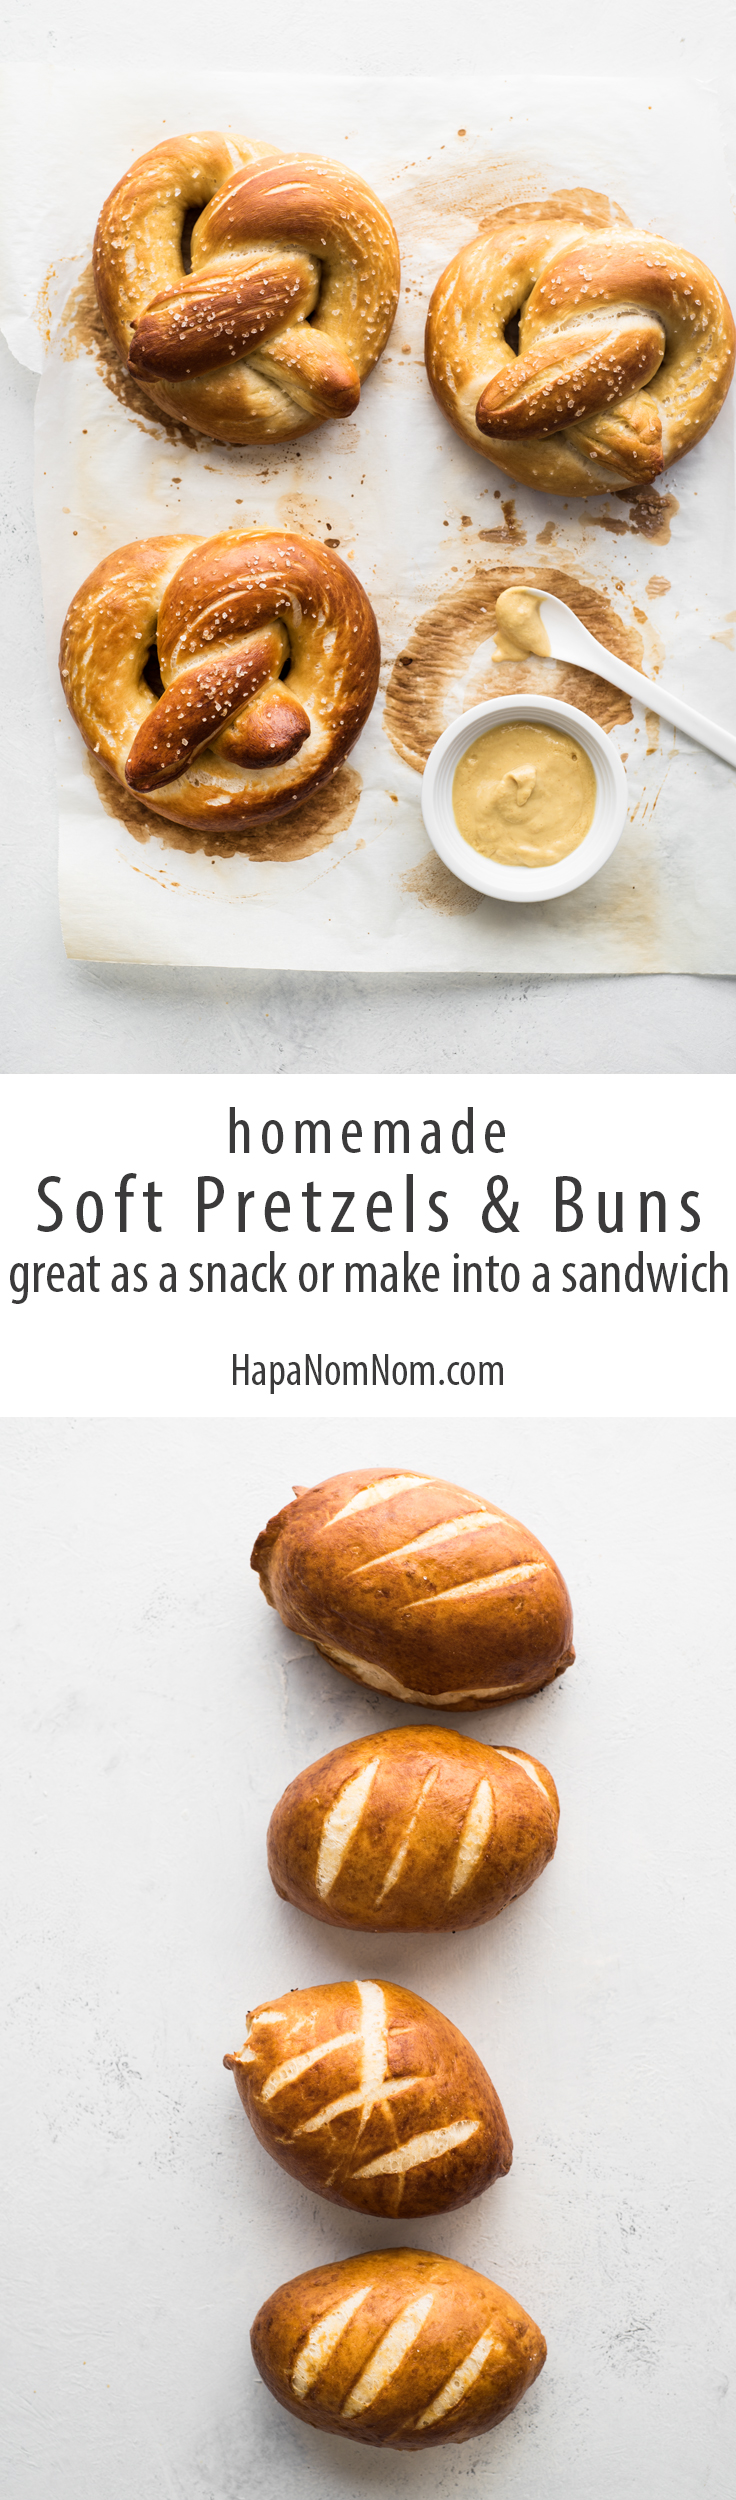 Homemade Soft Pretzels - A perfect snack or makes a great sandwich! 